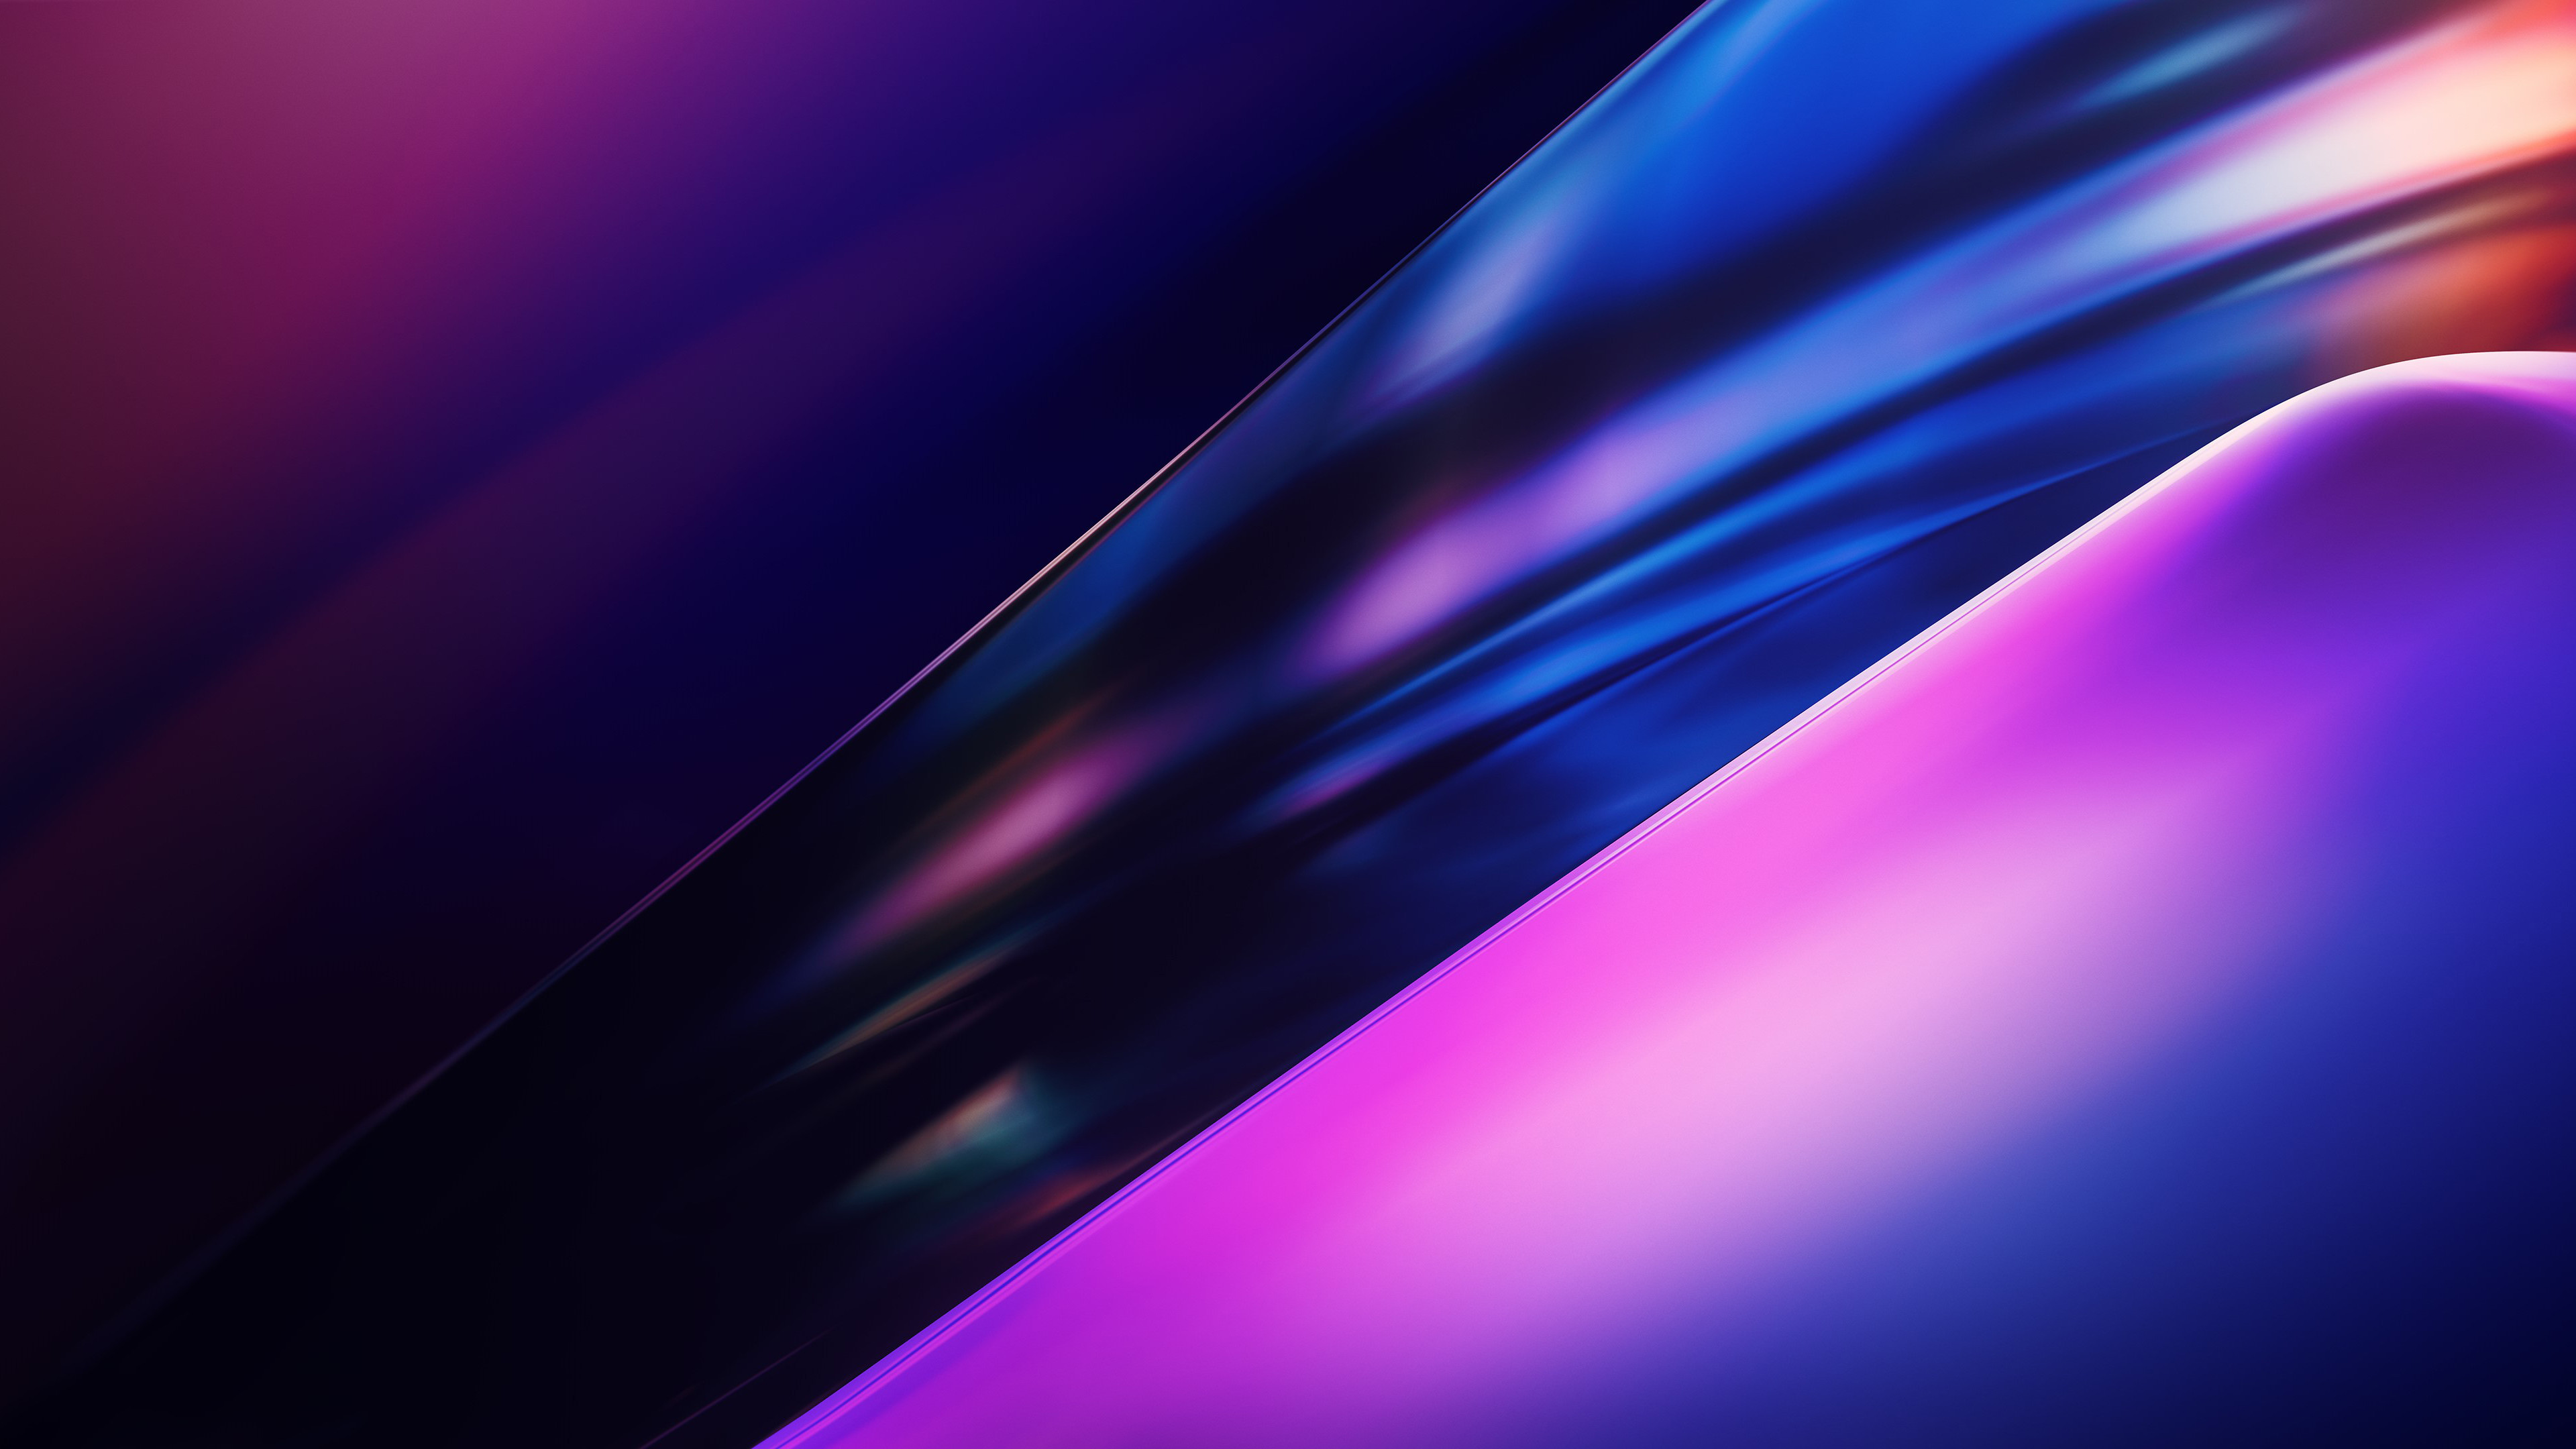 Wallpaper OnePlus 7T, abstract, colorful, 4K, OS #22190 - Page 4